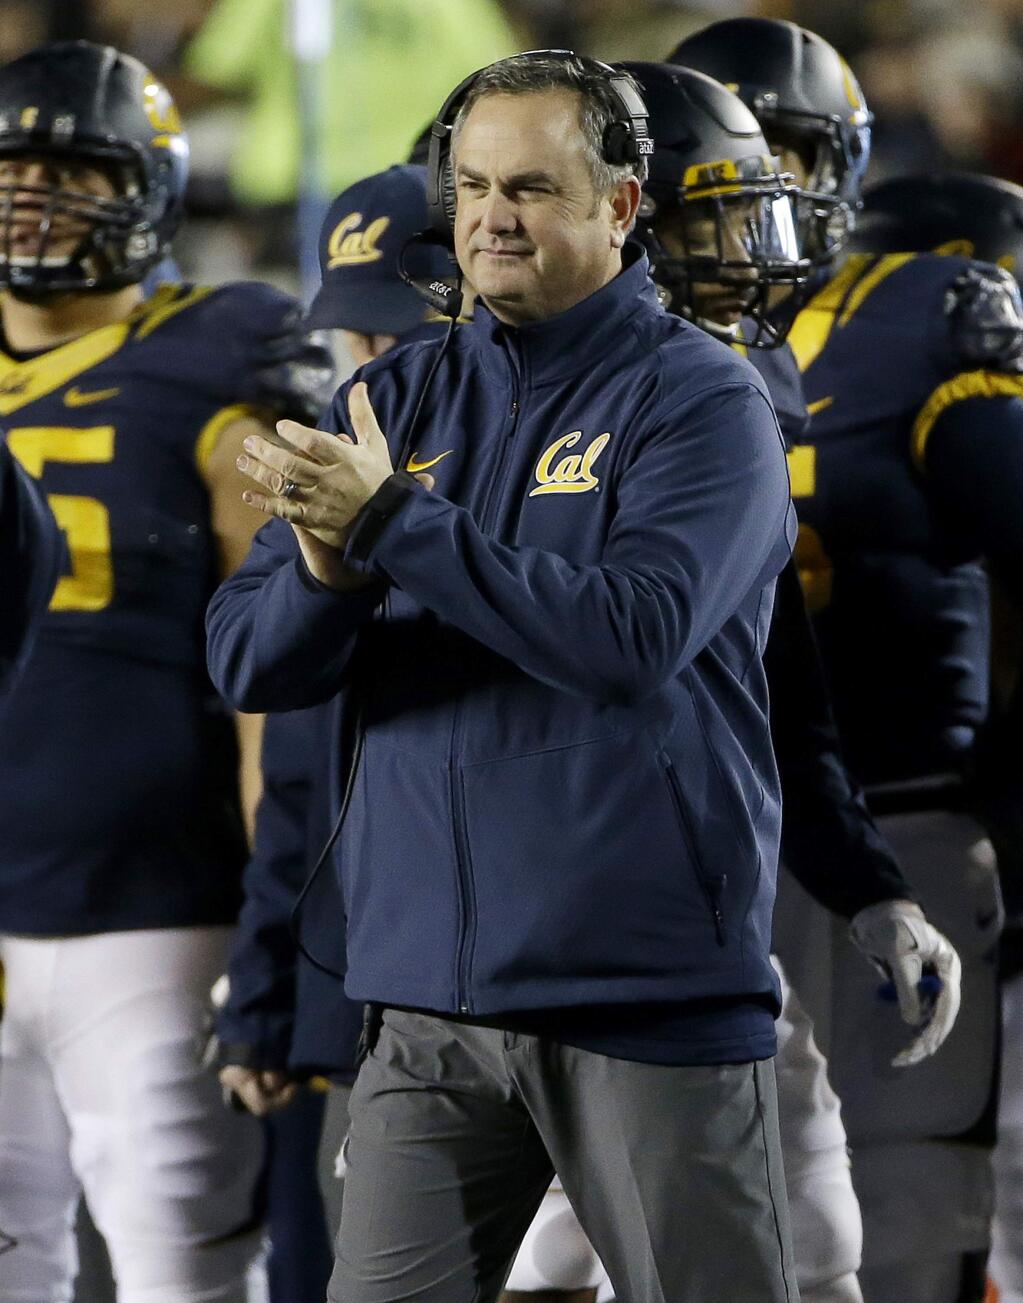 In this Nov. 28, 2015 photo, California head coach Sonny Dykes watches during the first half of a game against Arizona State in Berkeley. (AP Photo/Jeff Chiu)